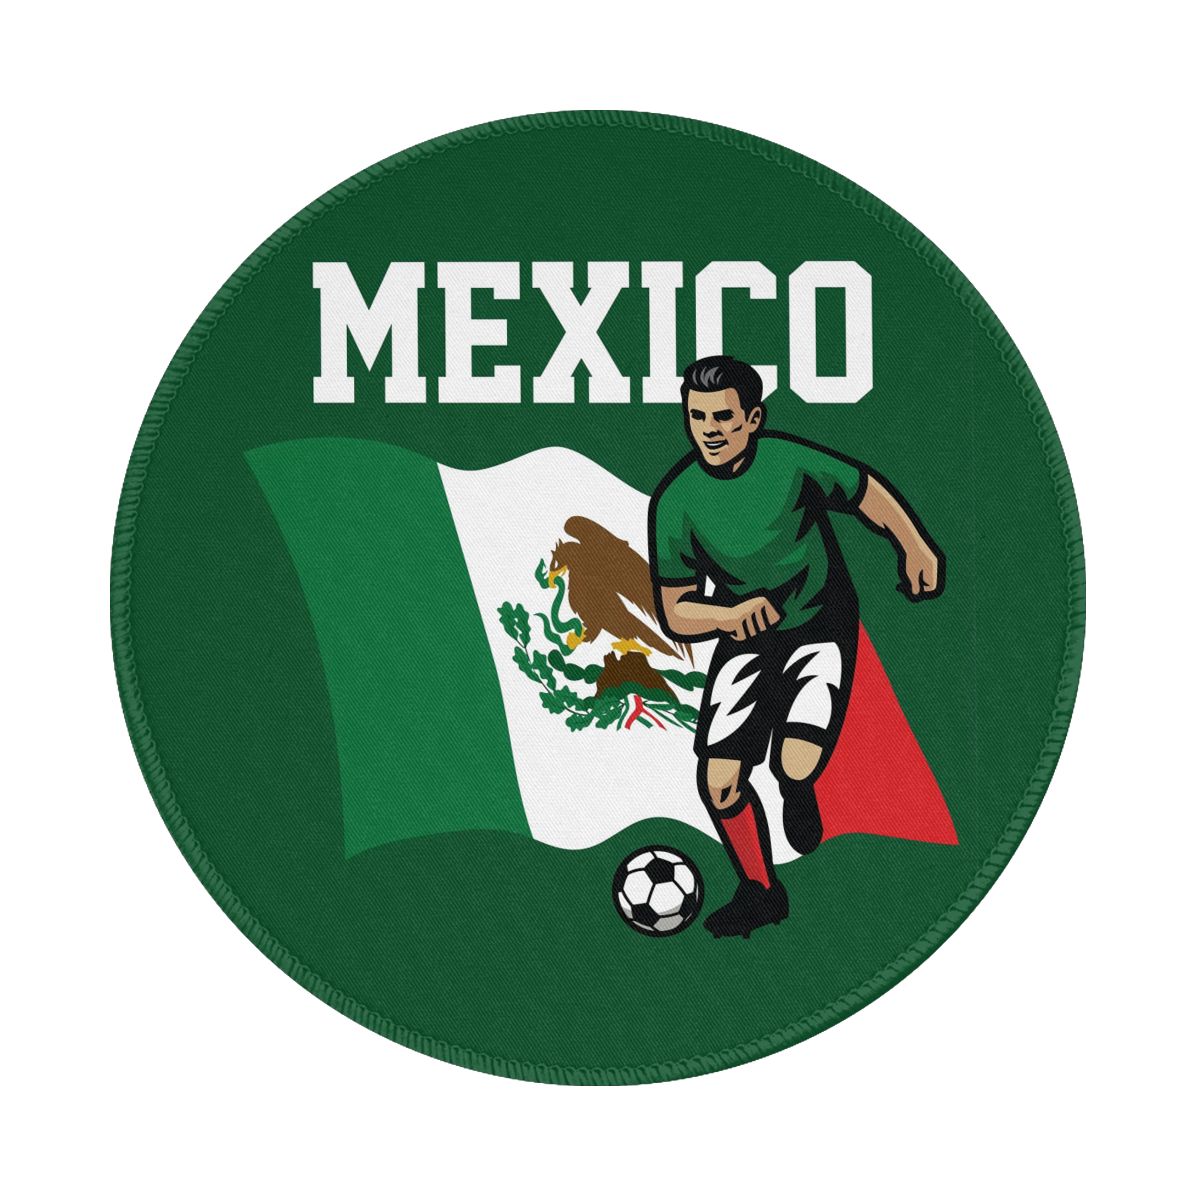 Mexico Soccer Player Waterproof Round Mouse Pad for Wireless Mouse